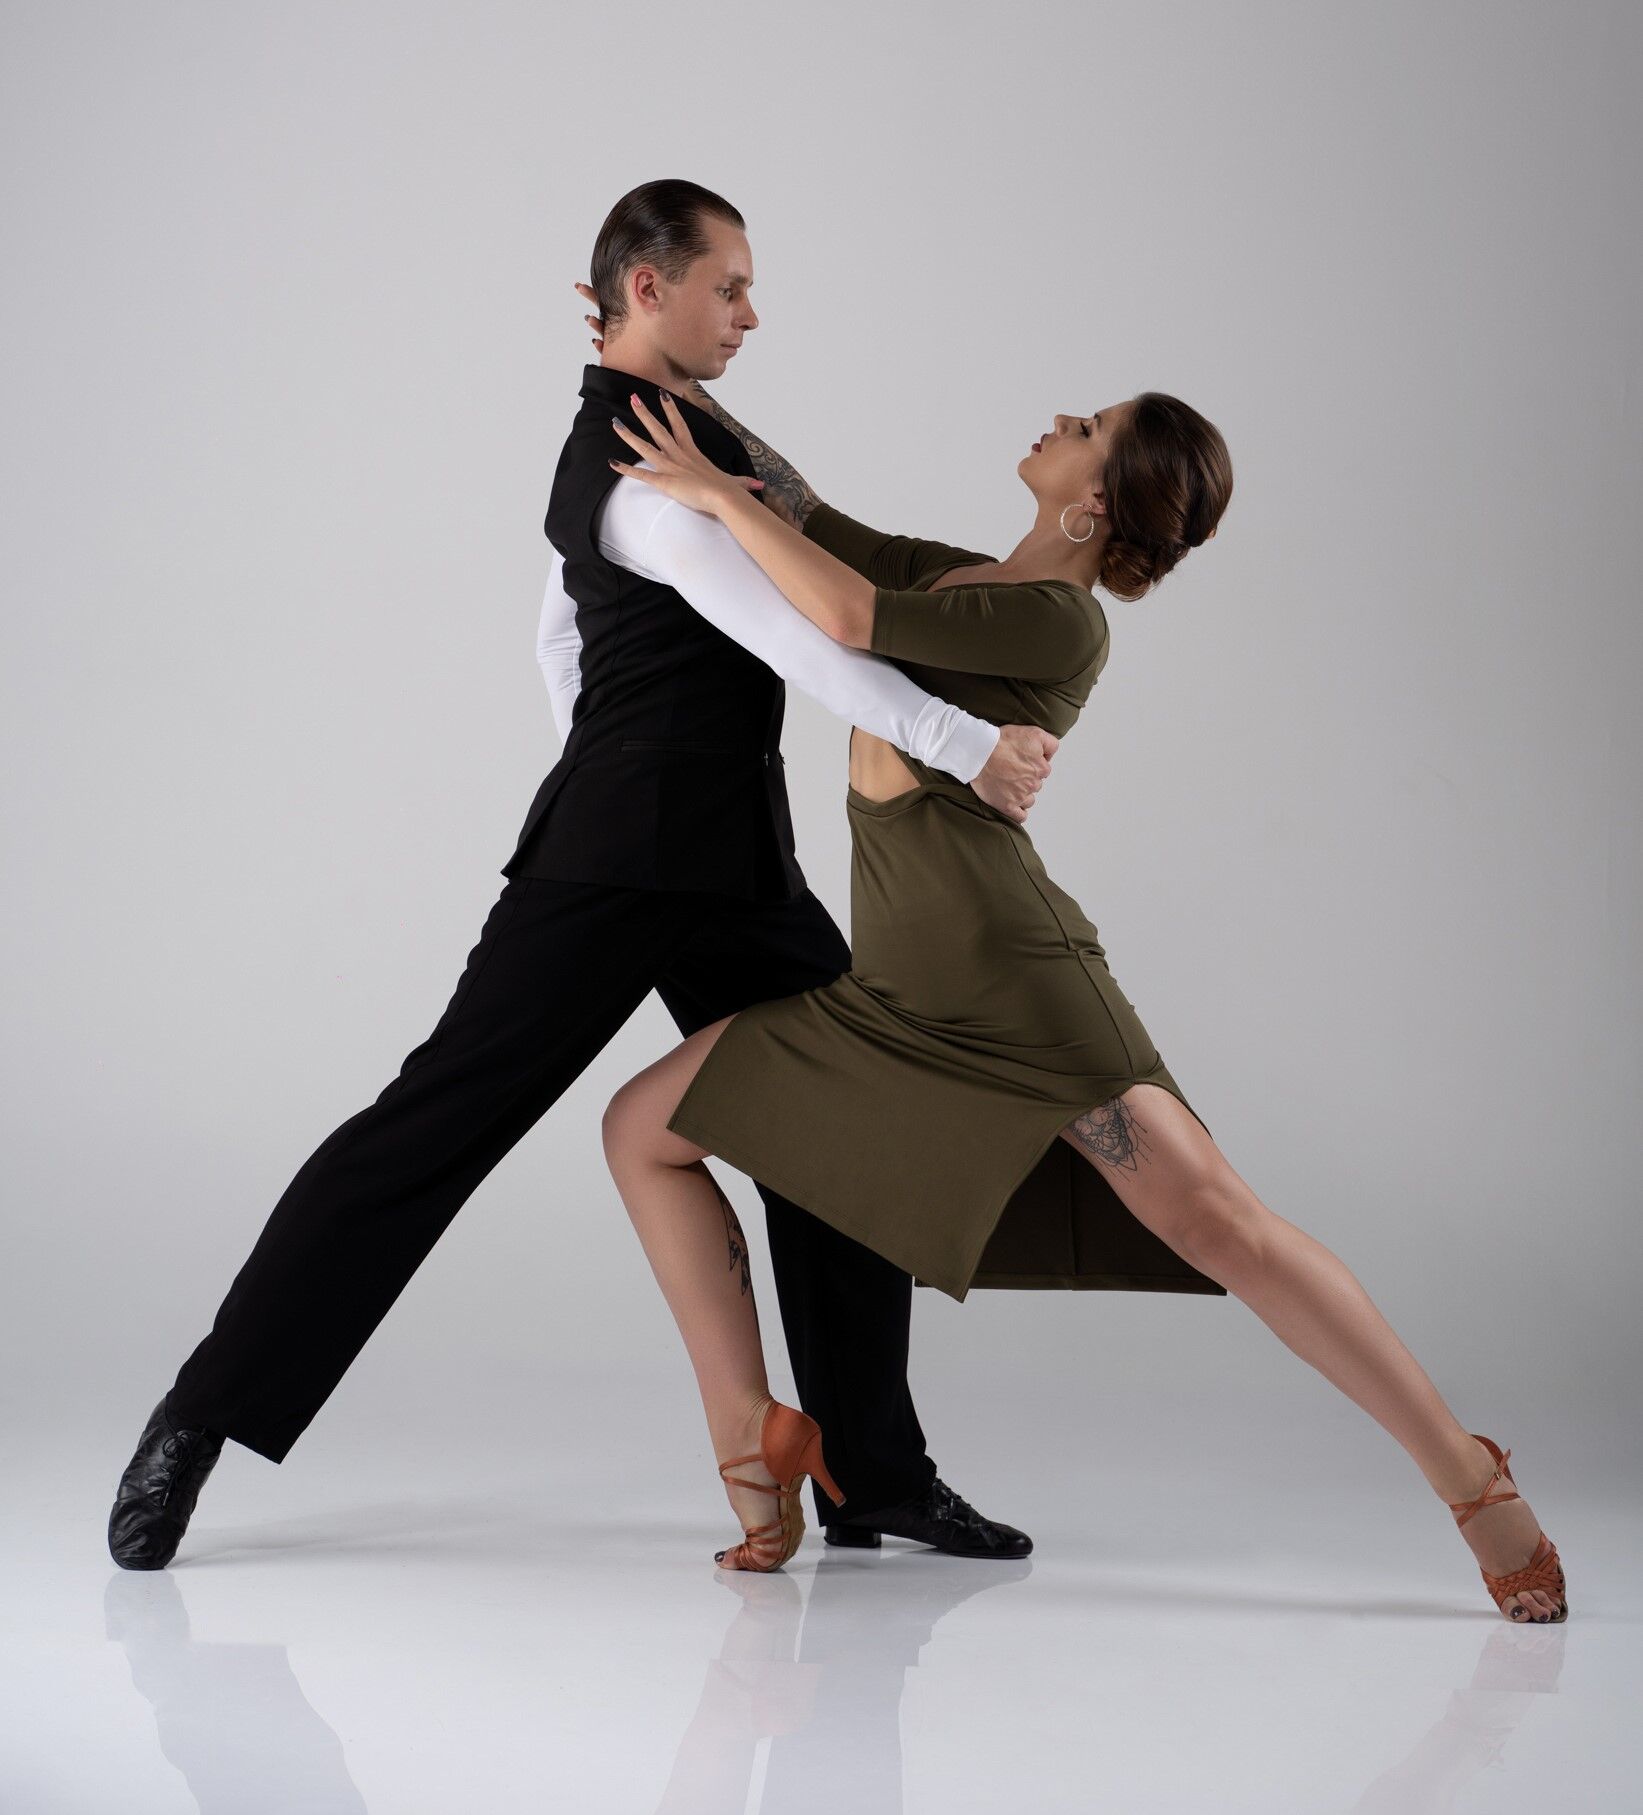 Flexible young modern dance couple posing in studio. Stock Photo by  ©vova130555@gmail.com 226388902